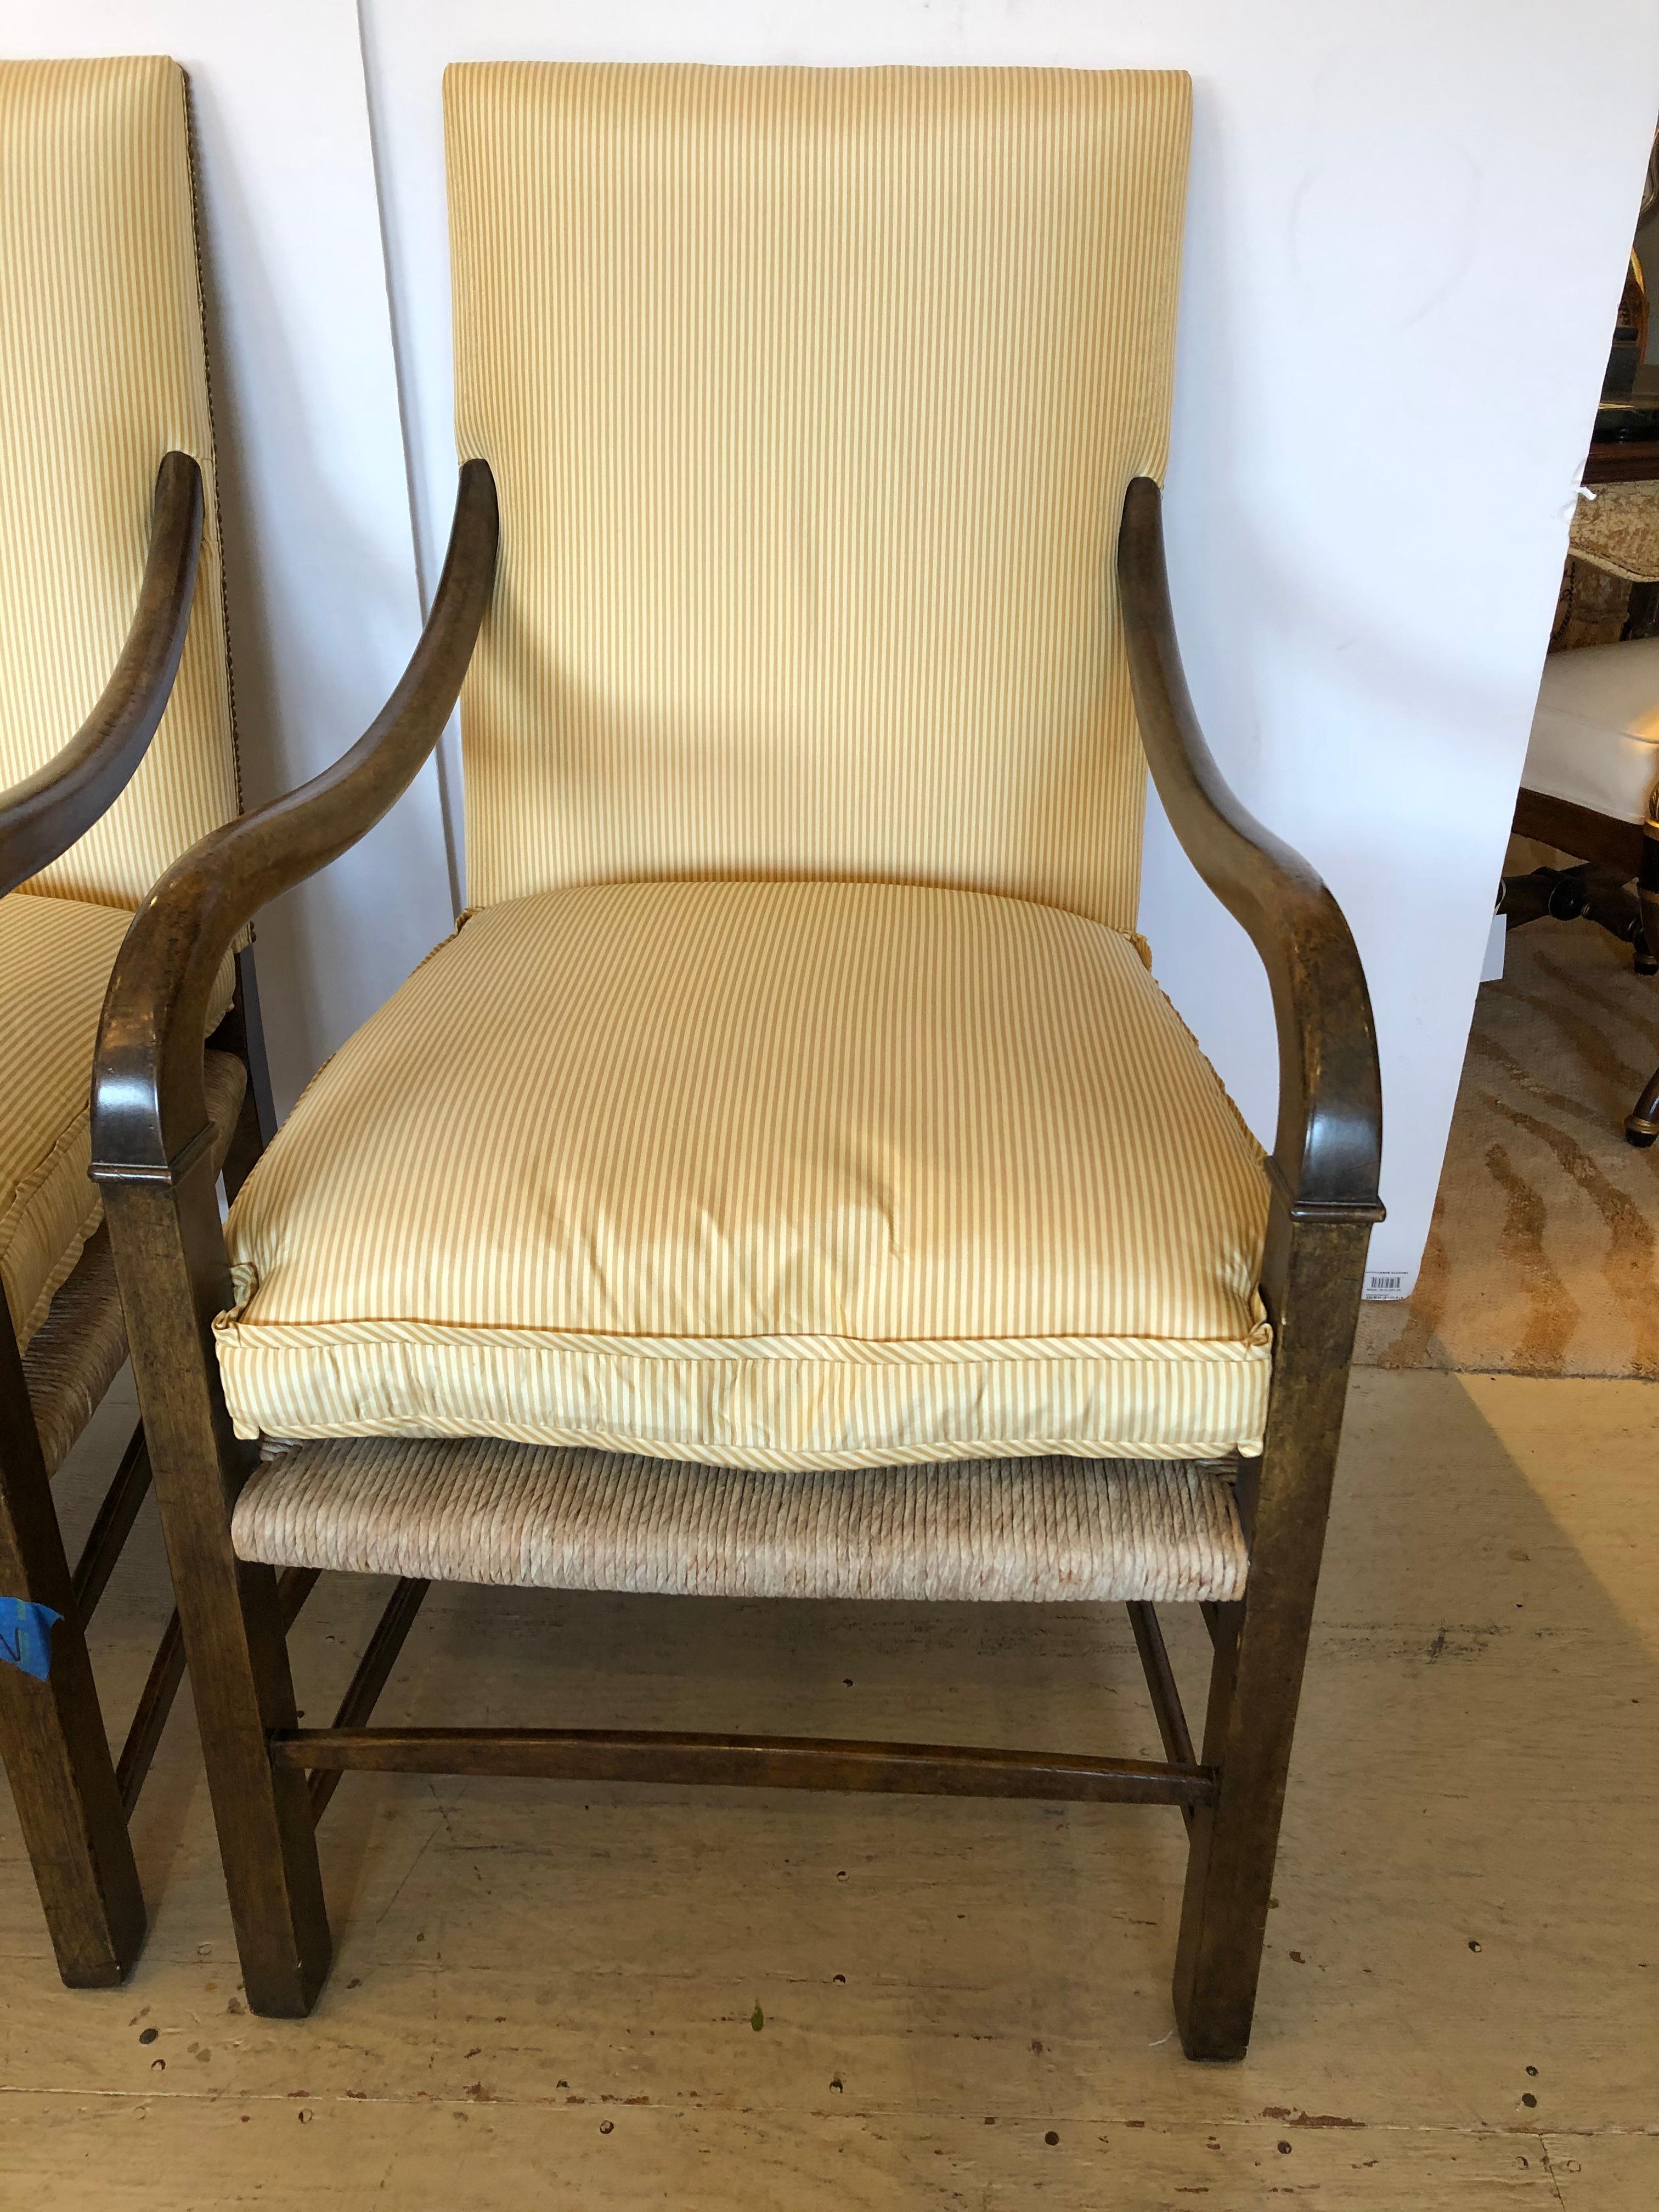 Great looking pair of designer armchairs having rich wooden frame, rush seats, and Nancy Corzine's signature striped upholstery. Handsome window pane backs.
Measures: Arm height 27.5
Seat depth 22.5.